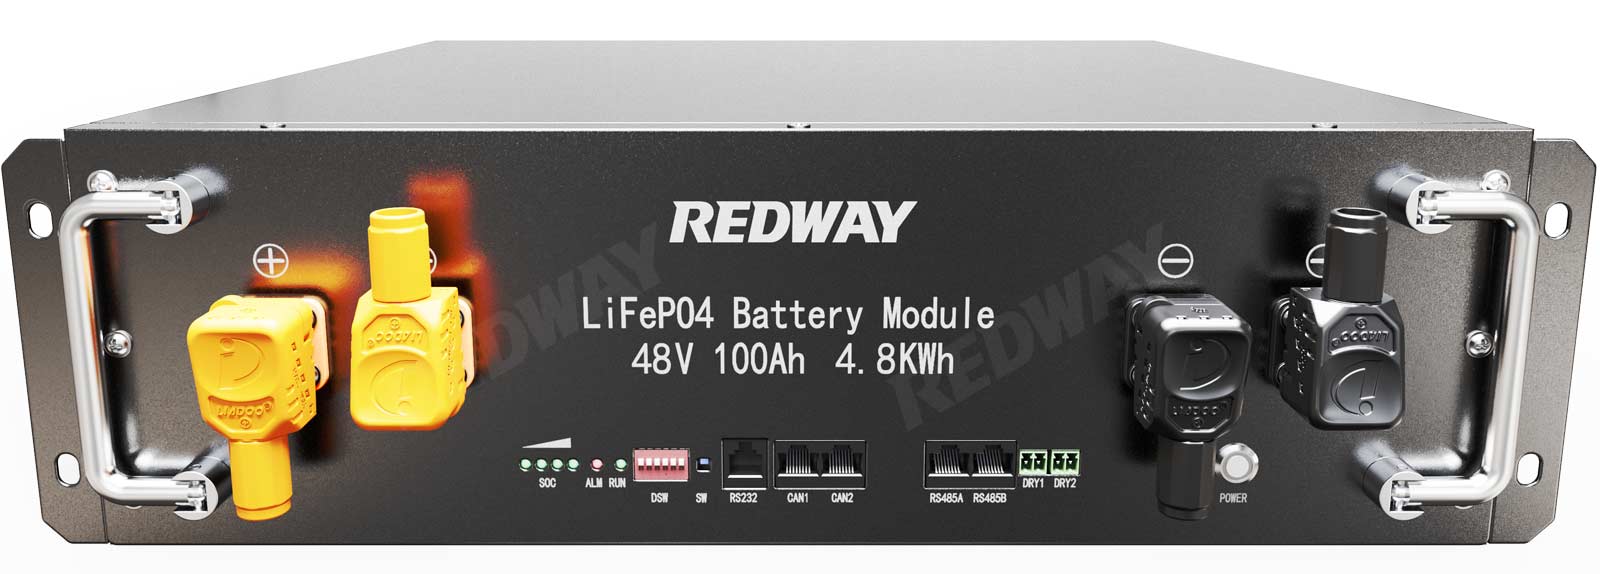 OEM Services for Lithium Battery Modules - Choose Redway Power